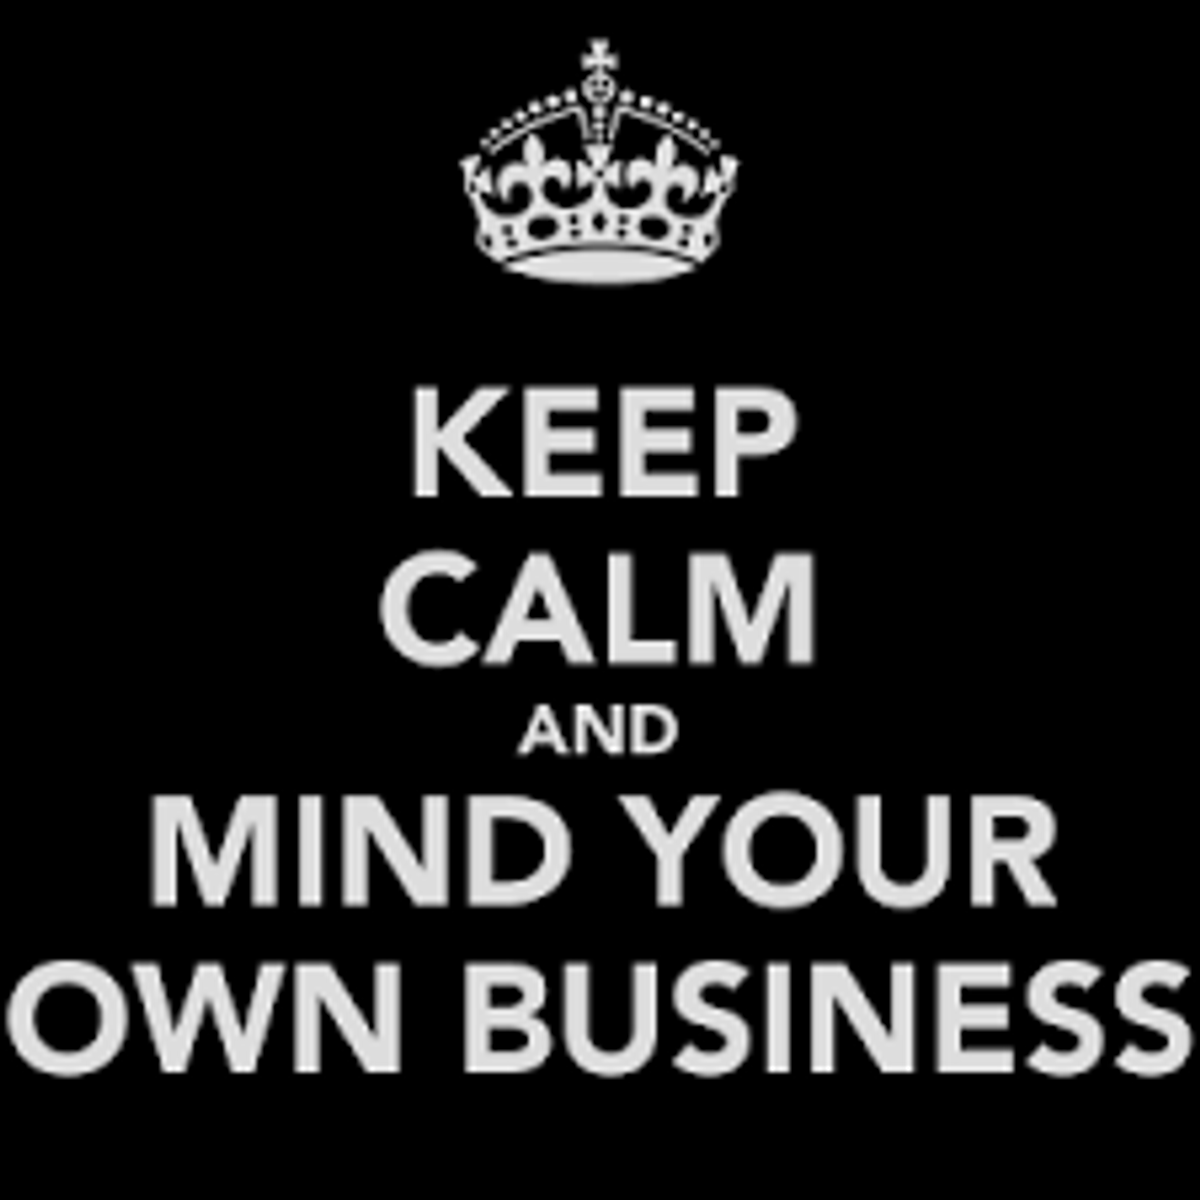 5 Reasons To Mind Your Own Business